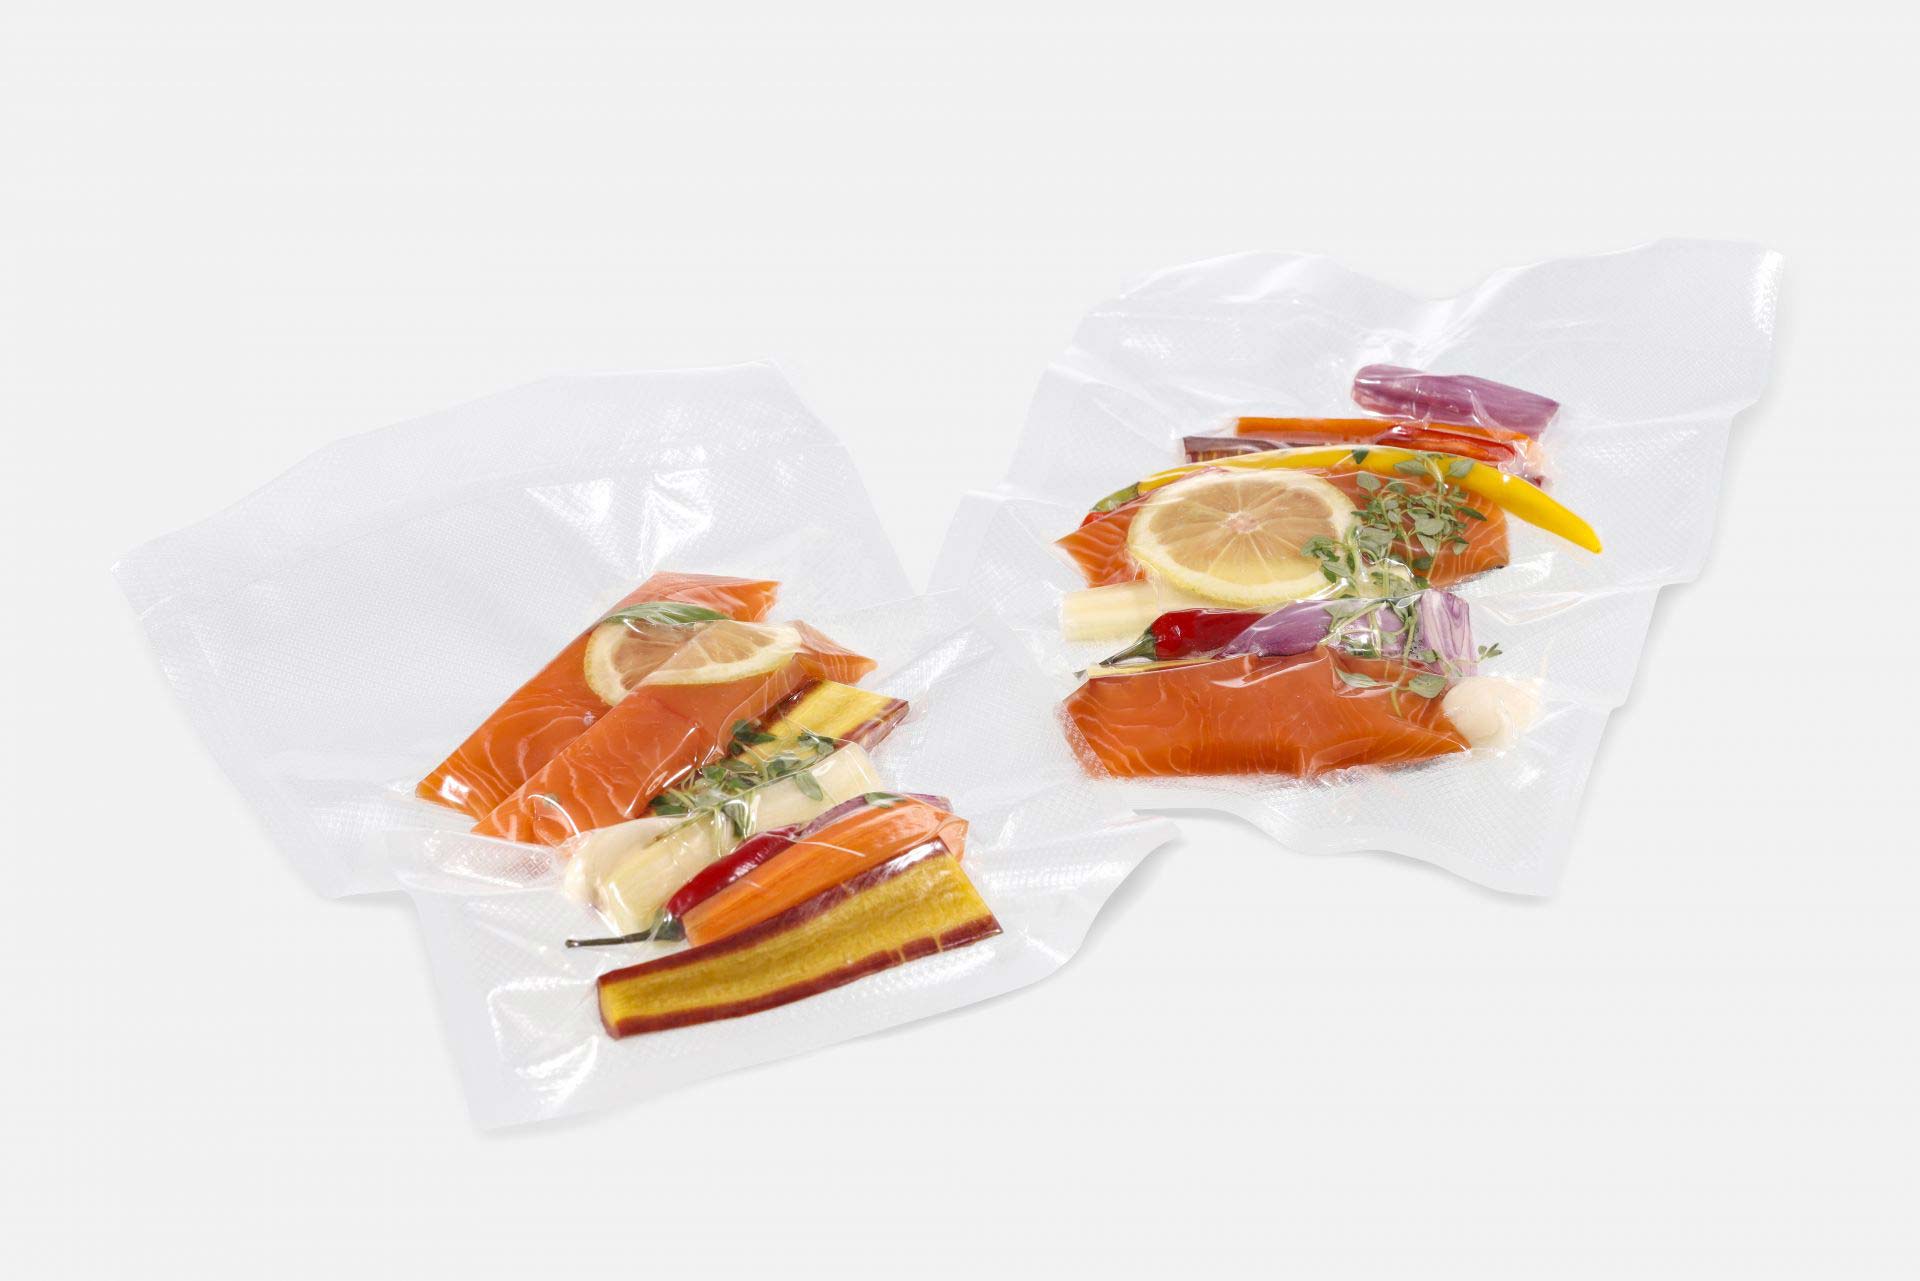 Two structured transparent vacuum bags vacuum-sealed with food for vacuum cooking